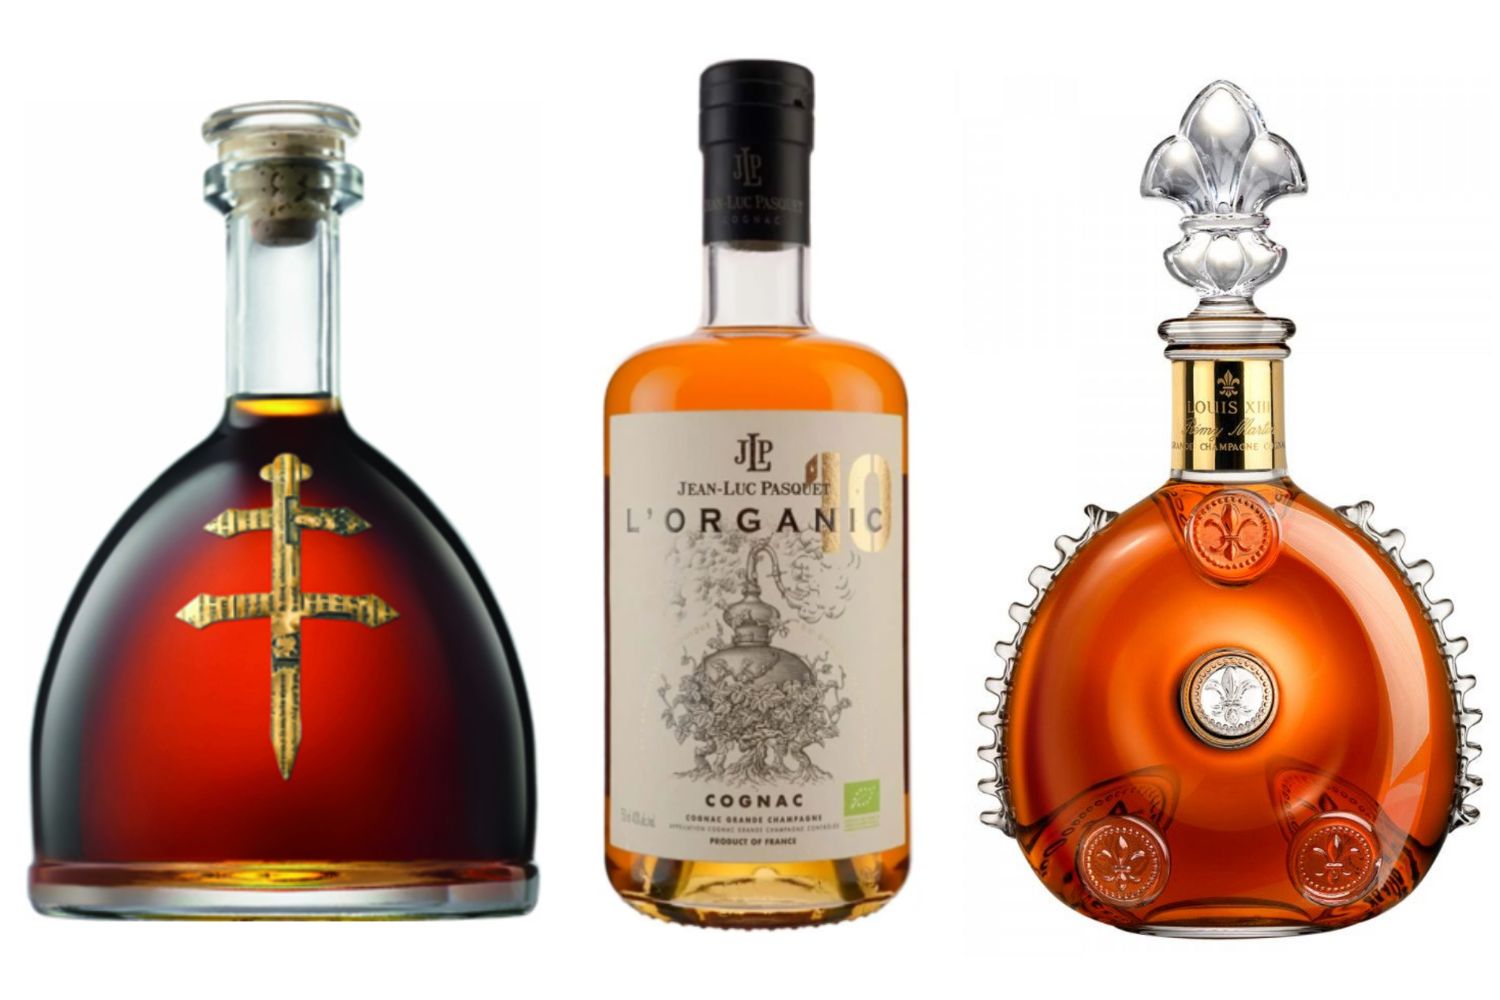 We Ranked 16 Cognac Brands from Worst to Best | Darcy